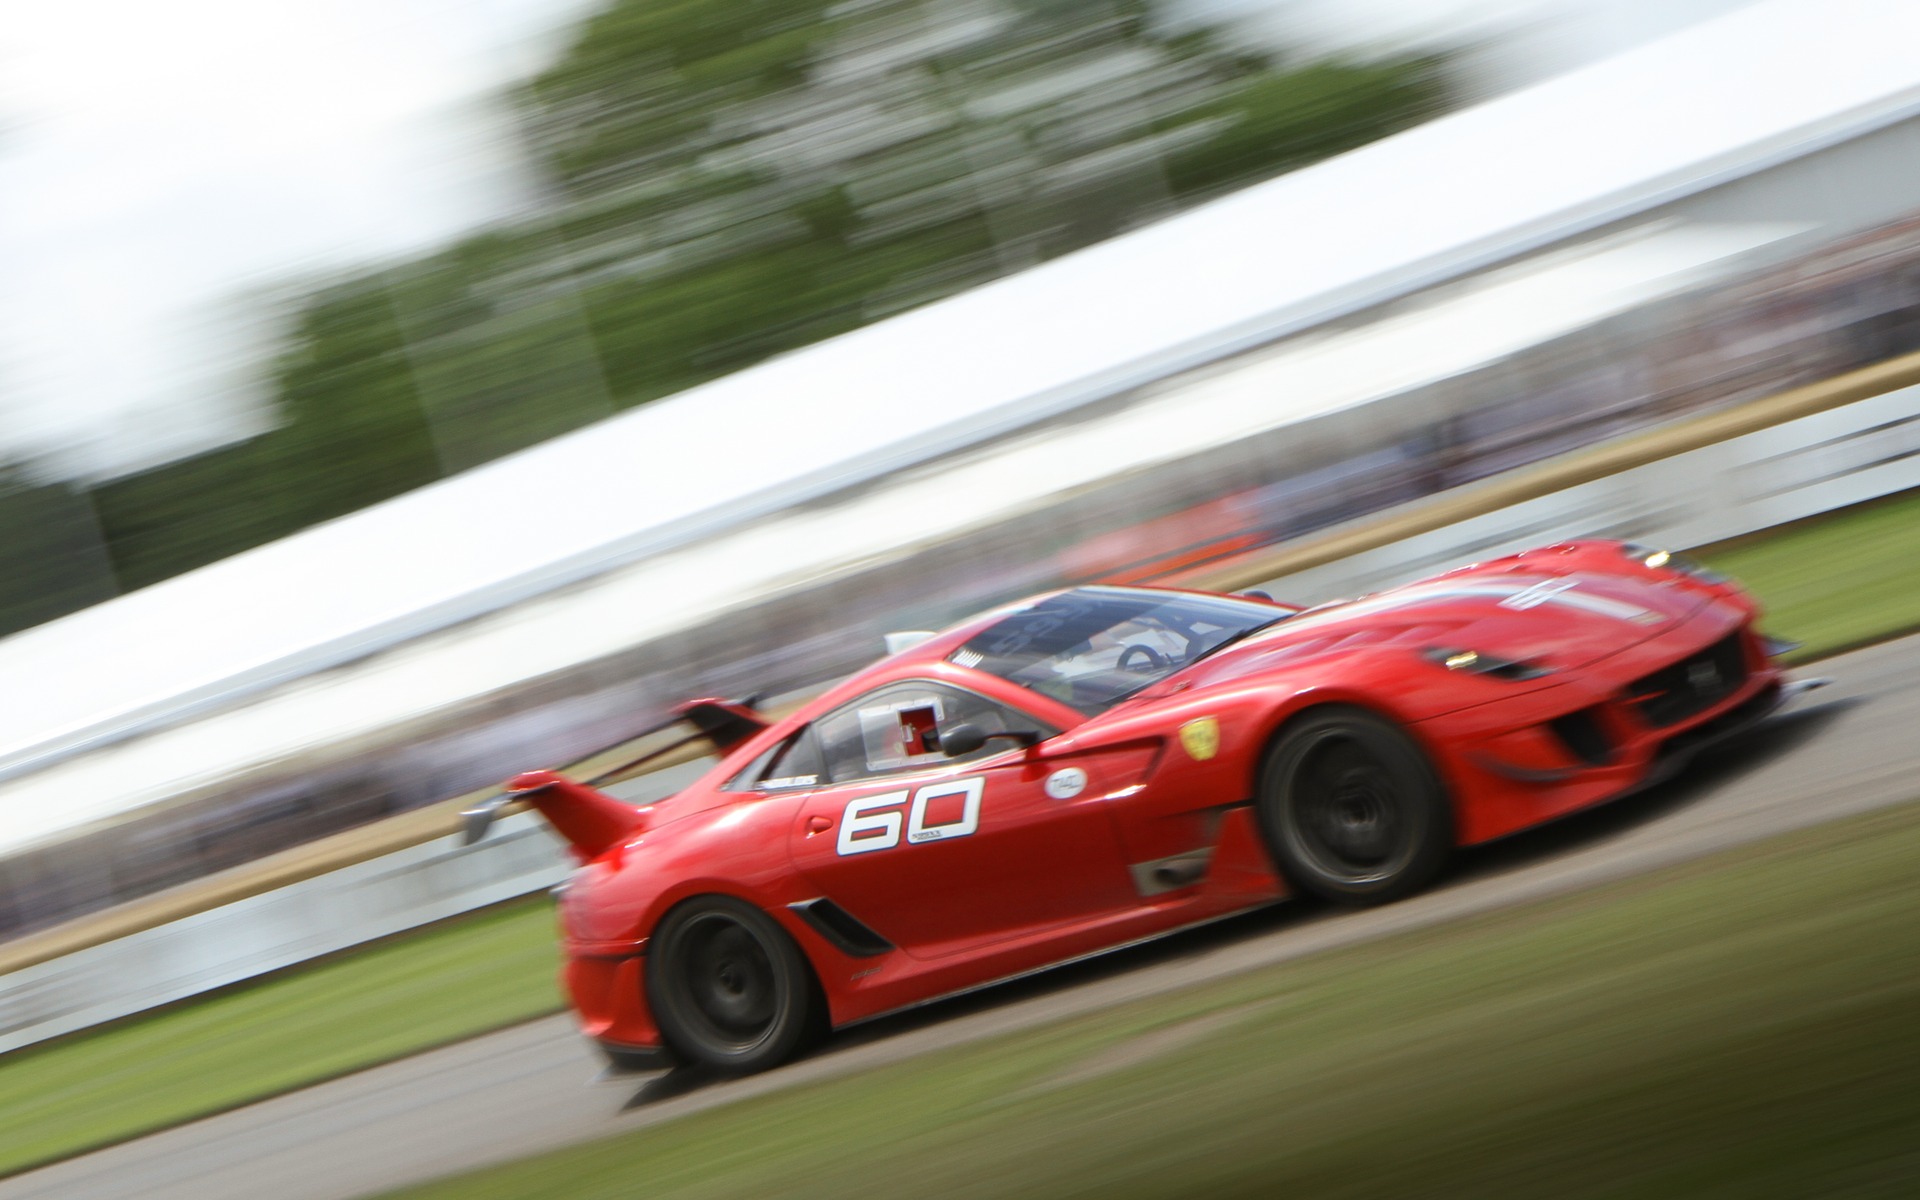 Ferrari 599XX in action at the Festival of Speed 2016